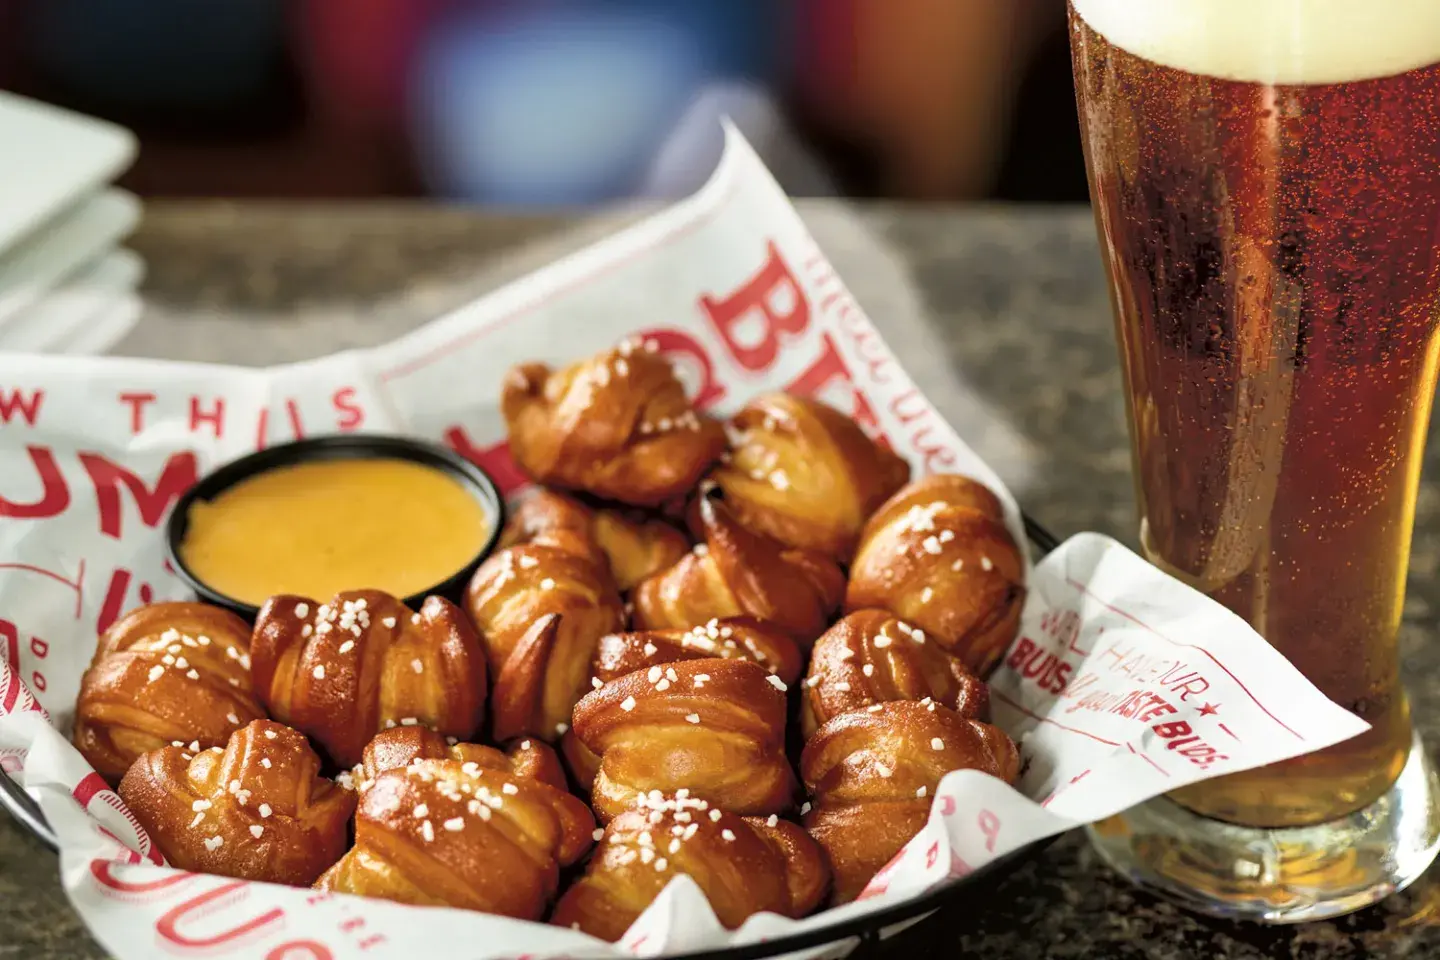 Red Robin Happy Hour deals